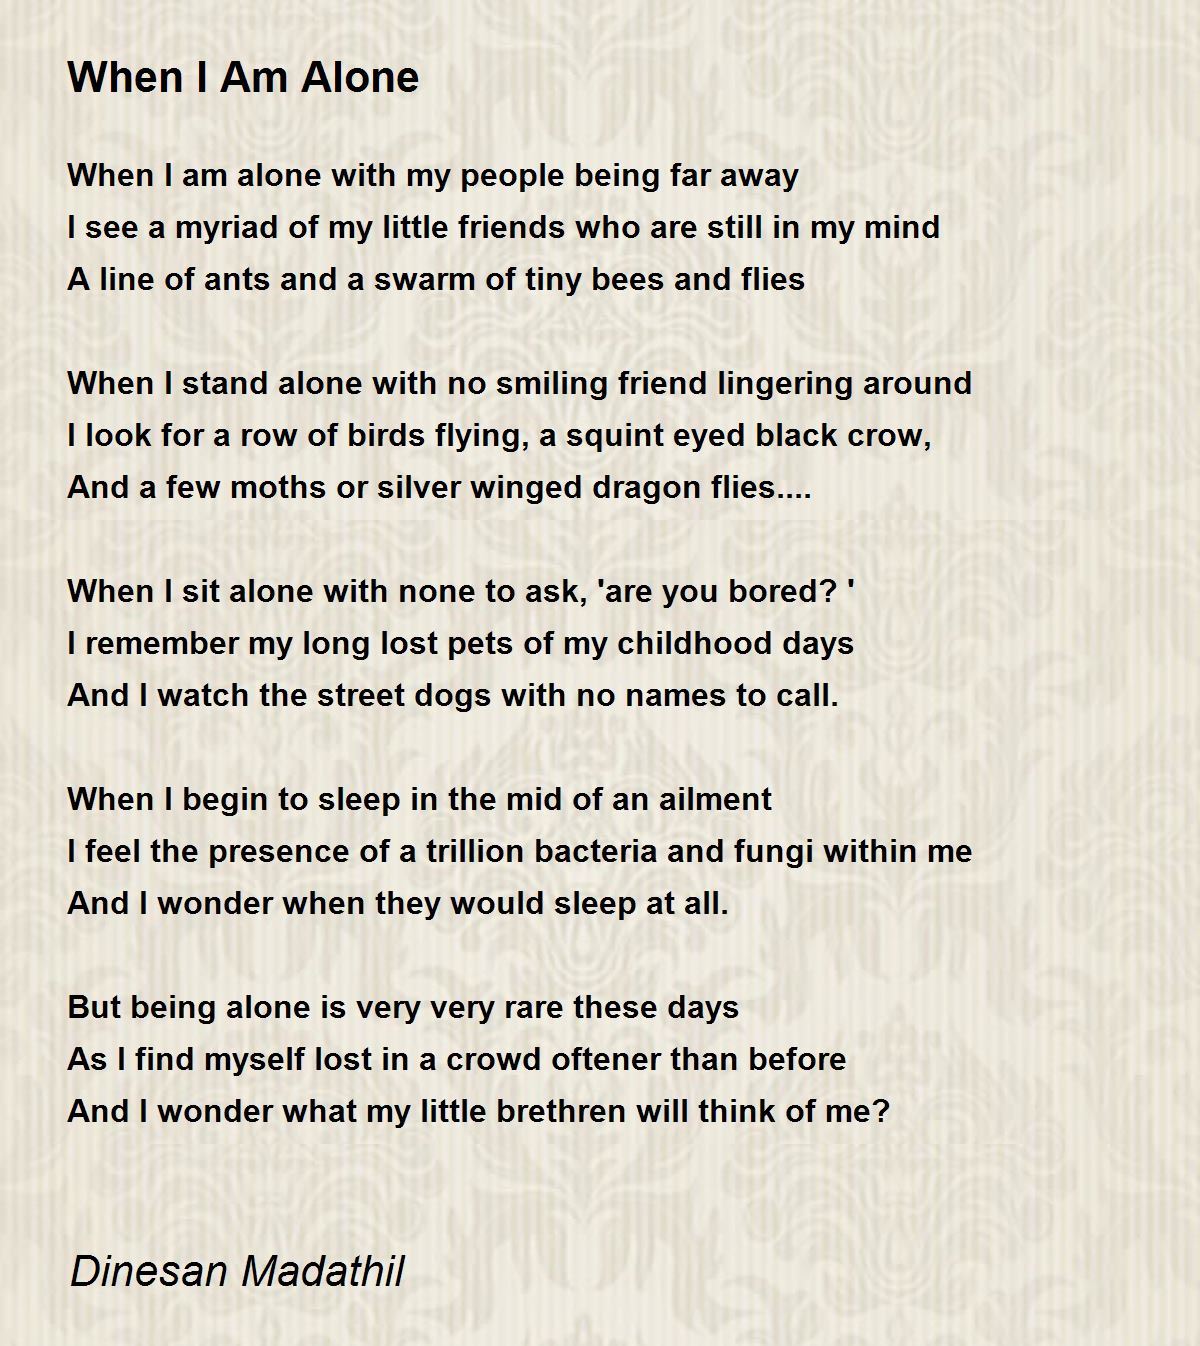 When I Am Alone - When I Am Alone Poem by Dinesan Madathil